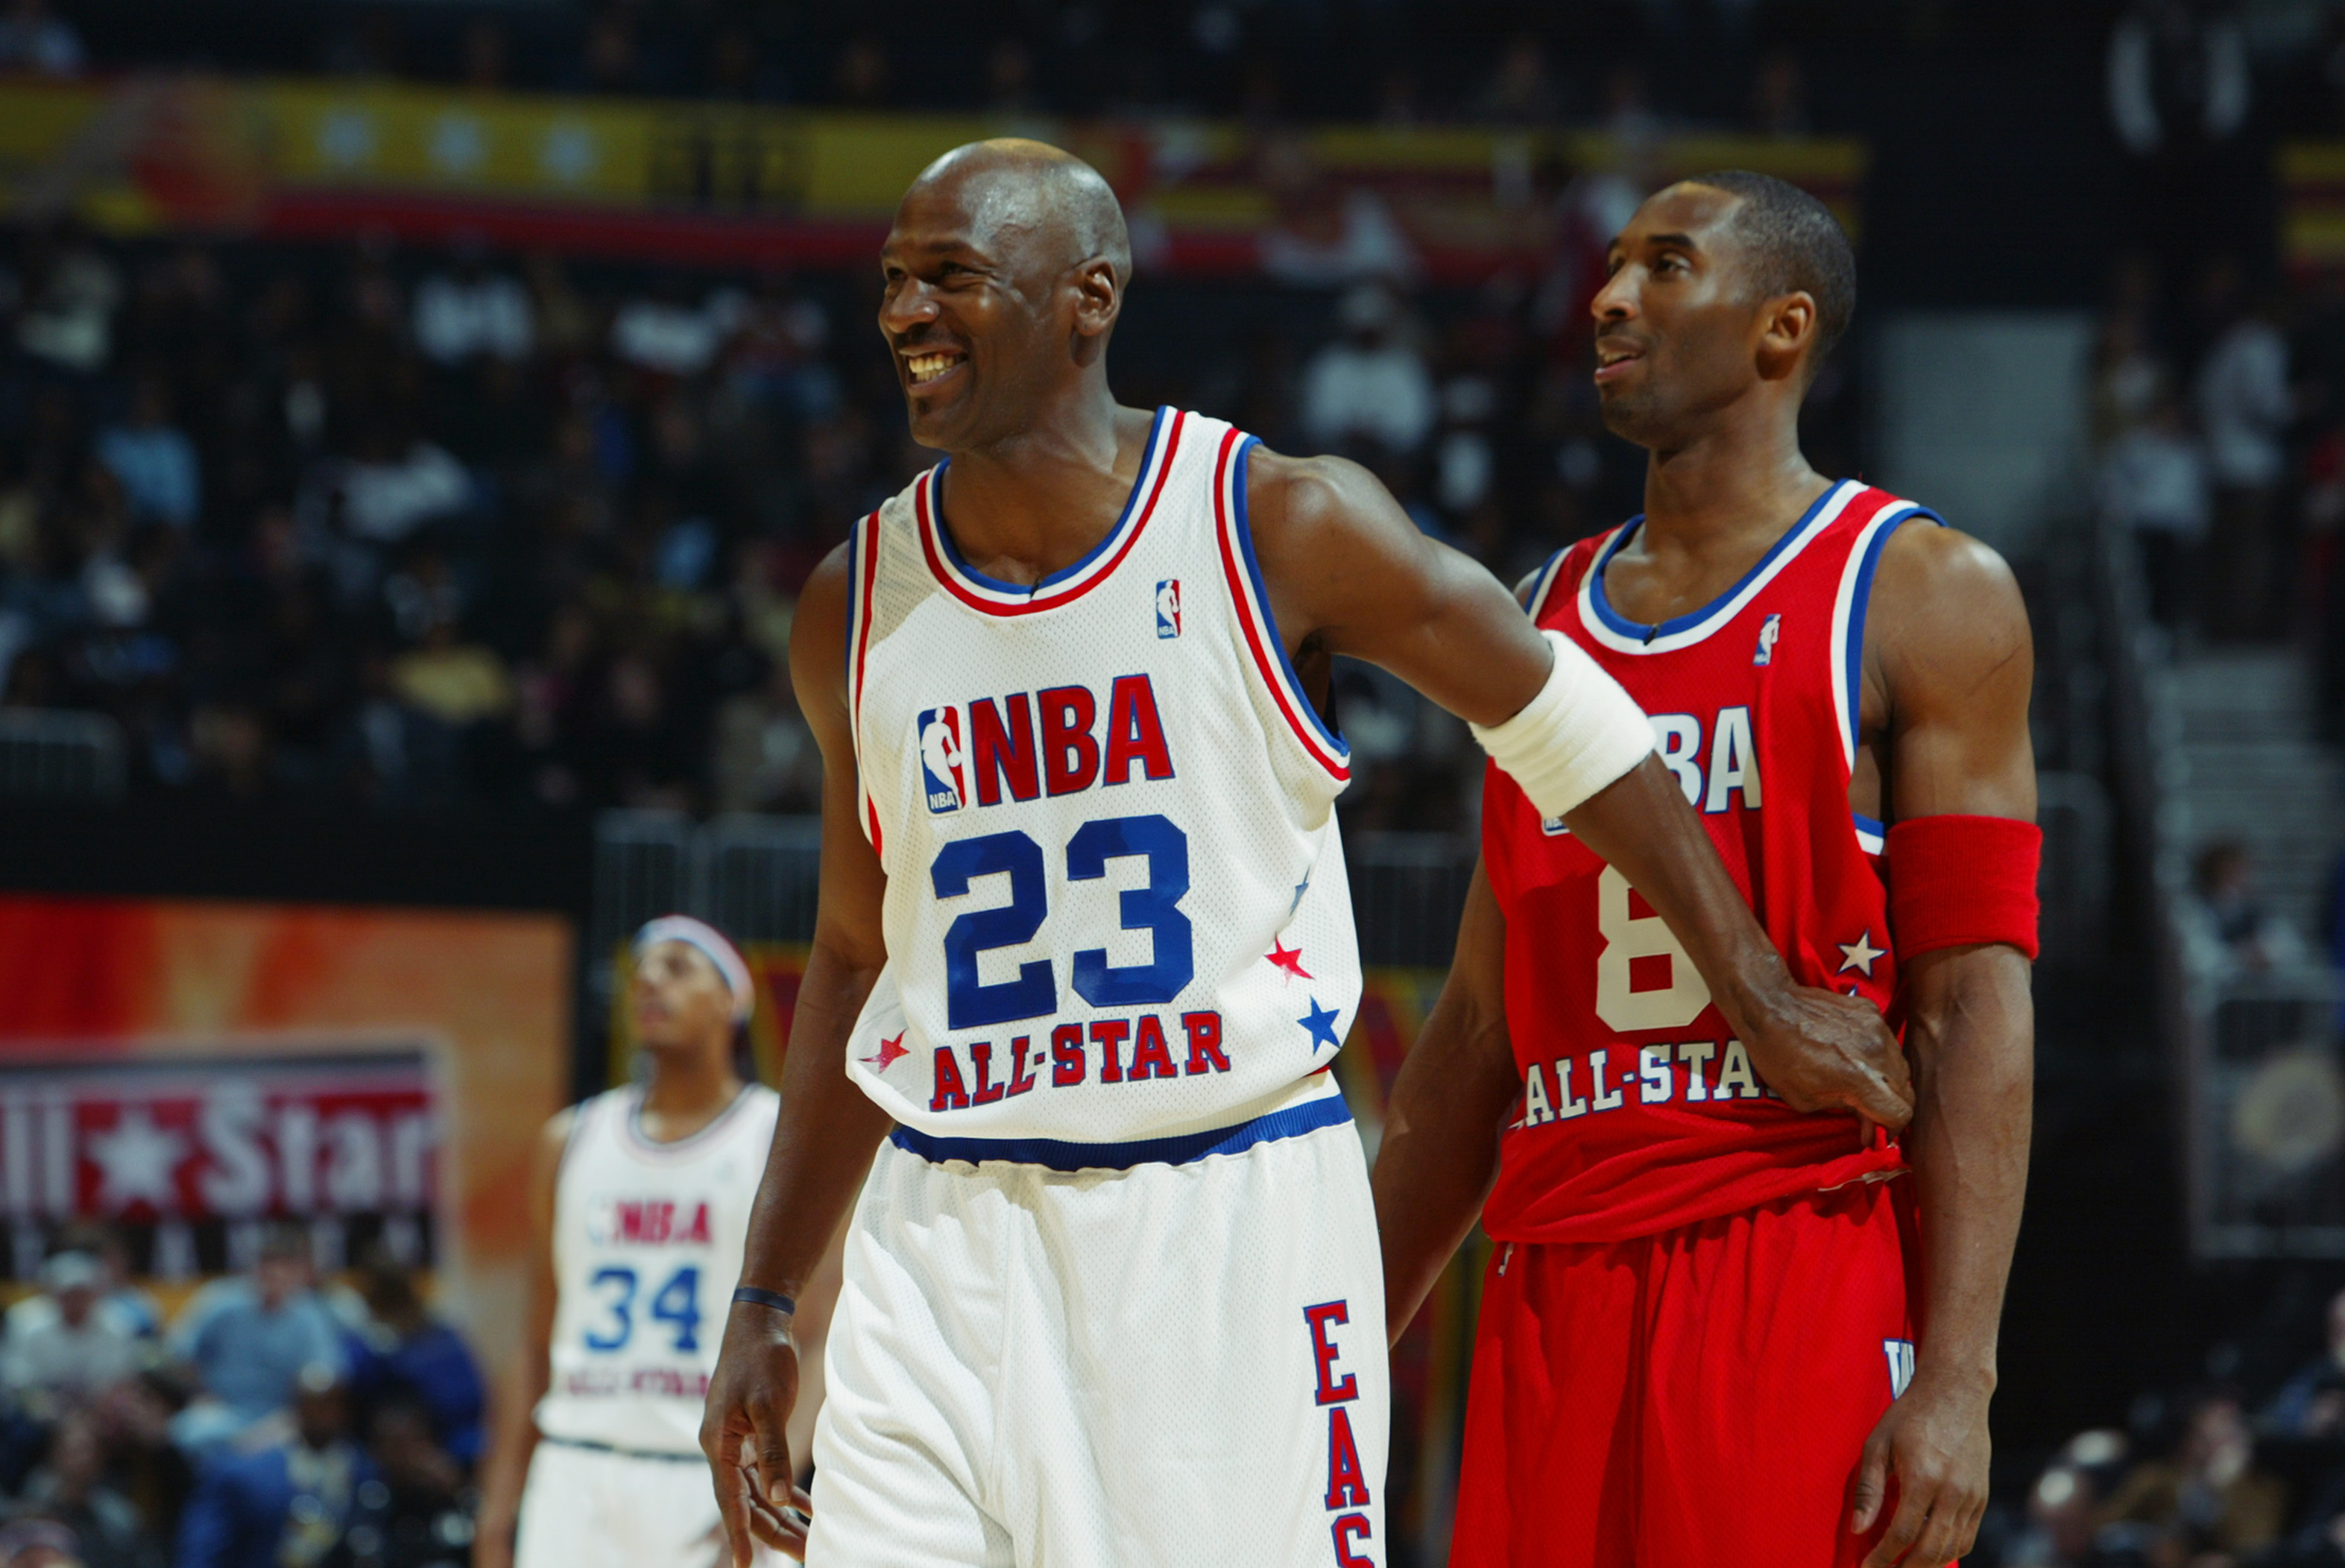 Kobe Bryant in the All-Star Game: Records, stats and best moments